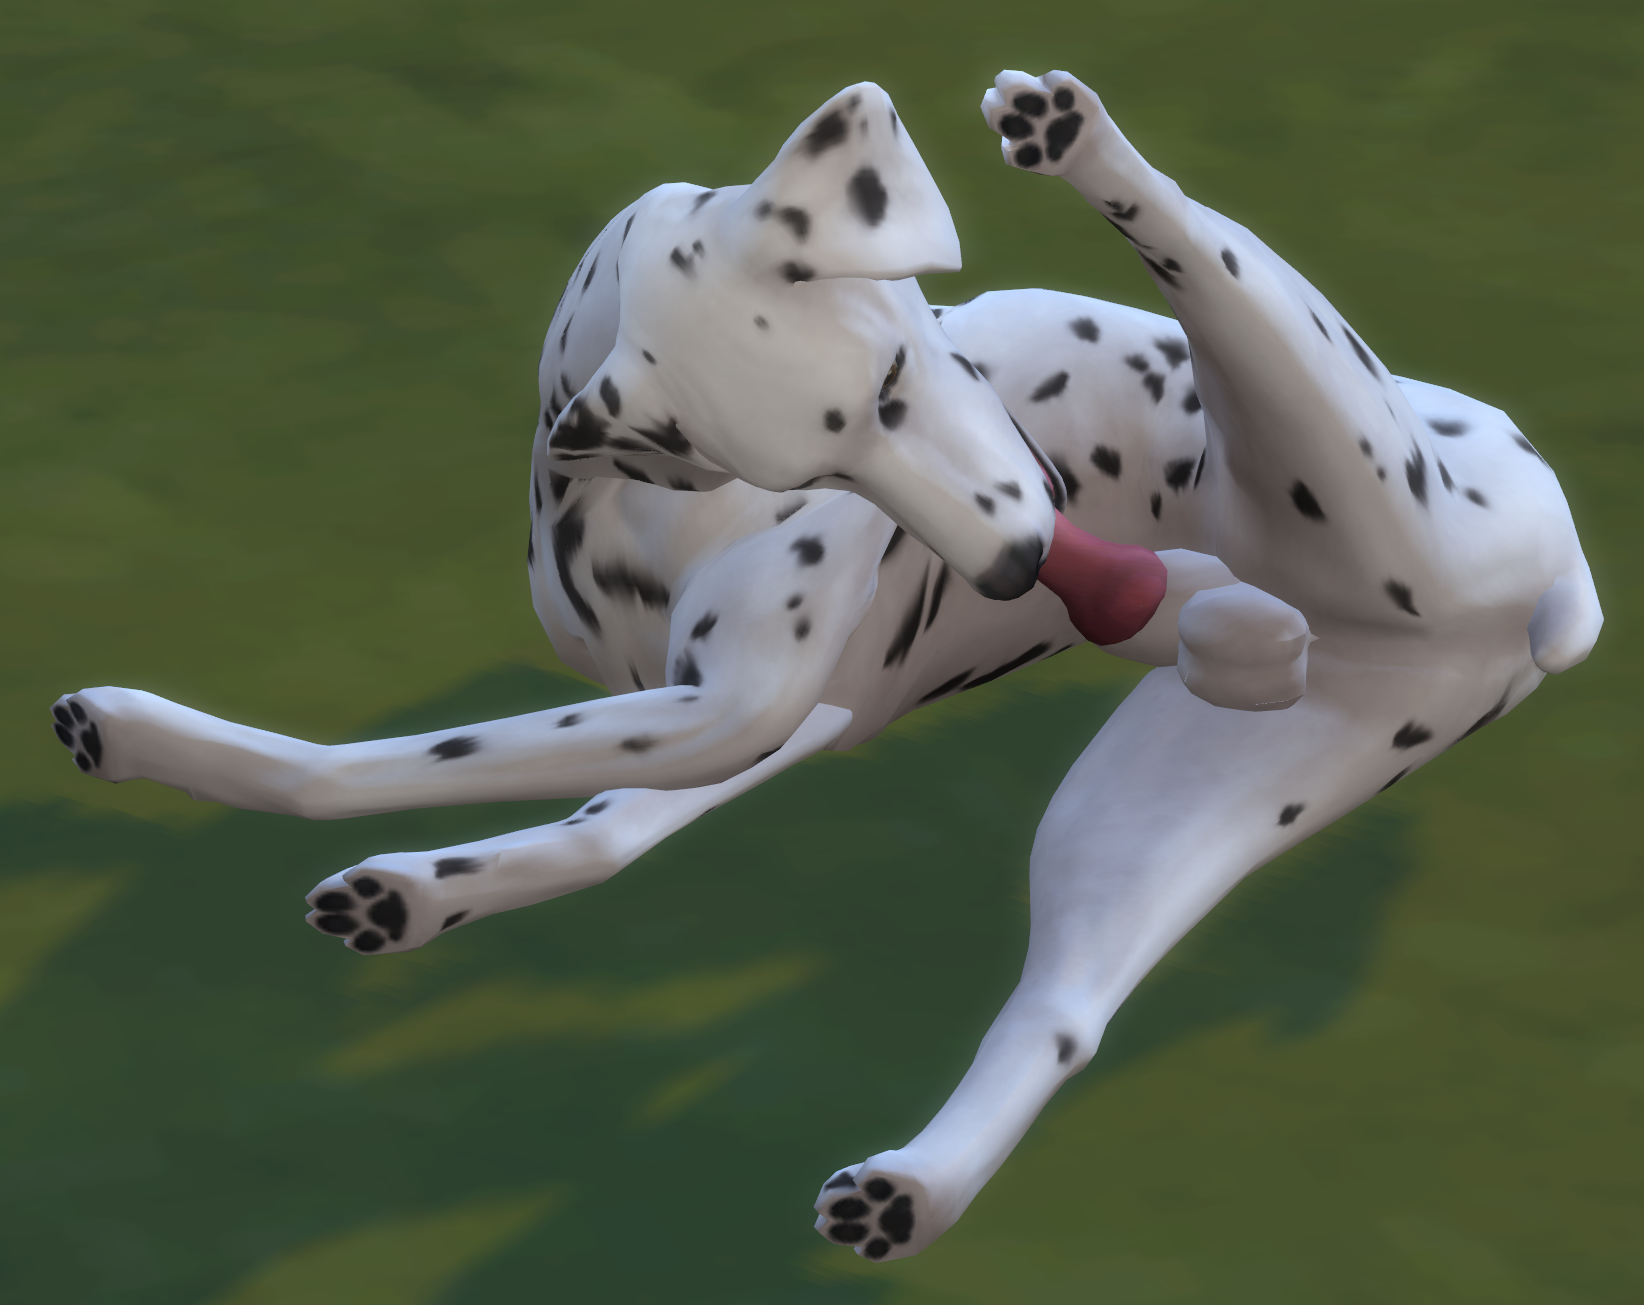 Sims 4 wicked pets